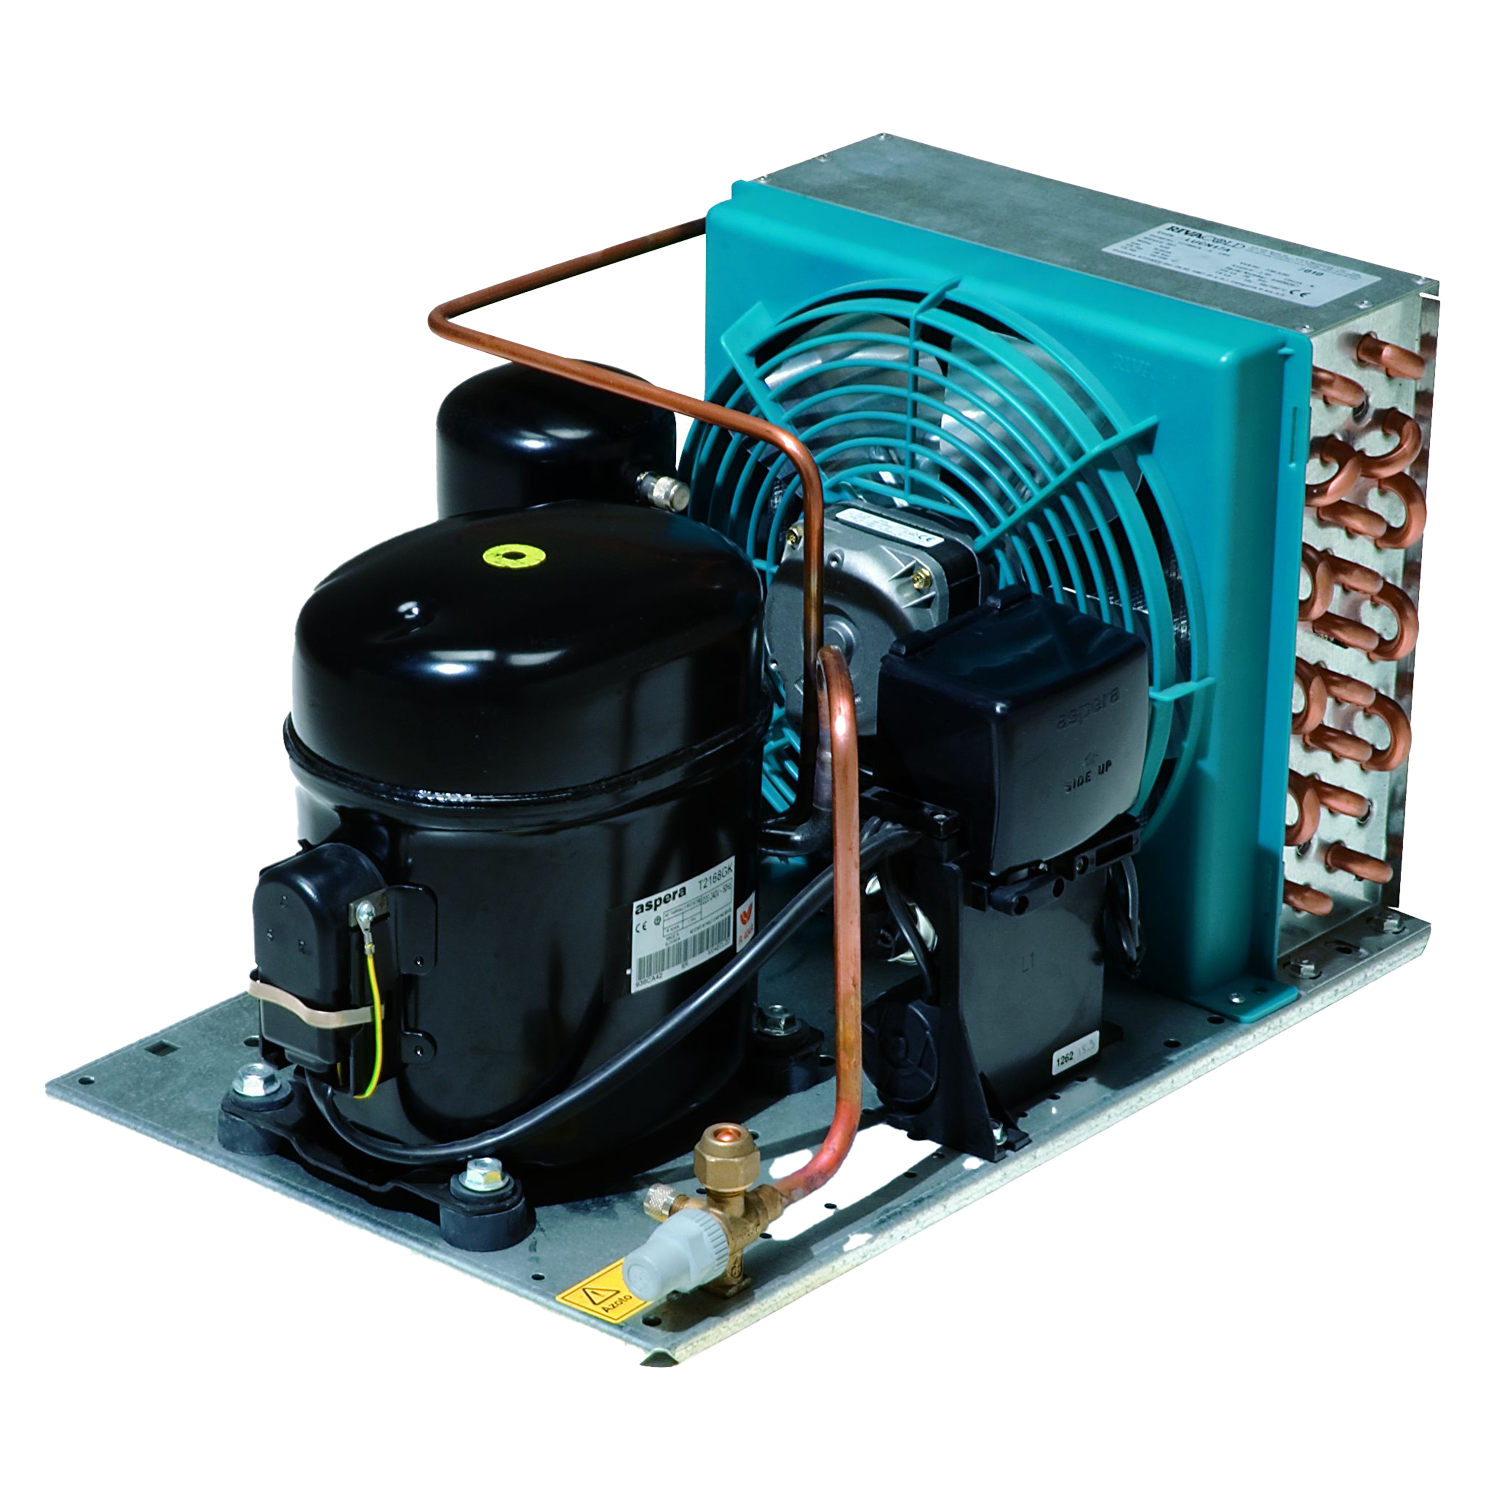 UC-Tecumseh: Air-cooled condensing units with Tecumseh reciprocating compressors – R134a/R513A/R449A/R452A